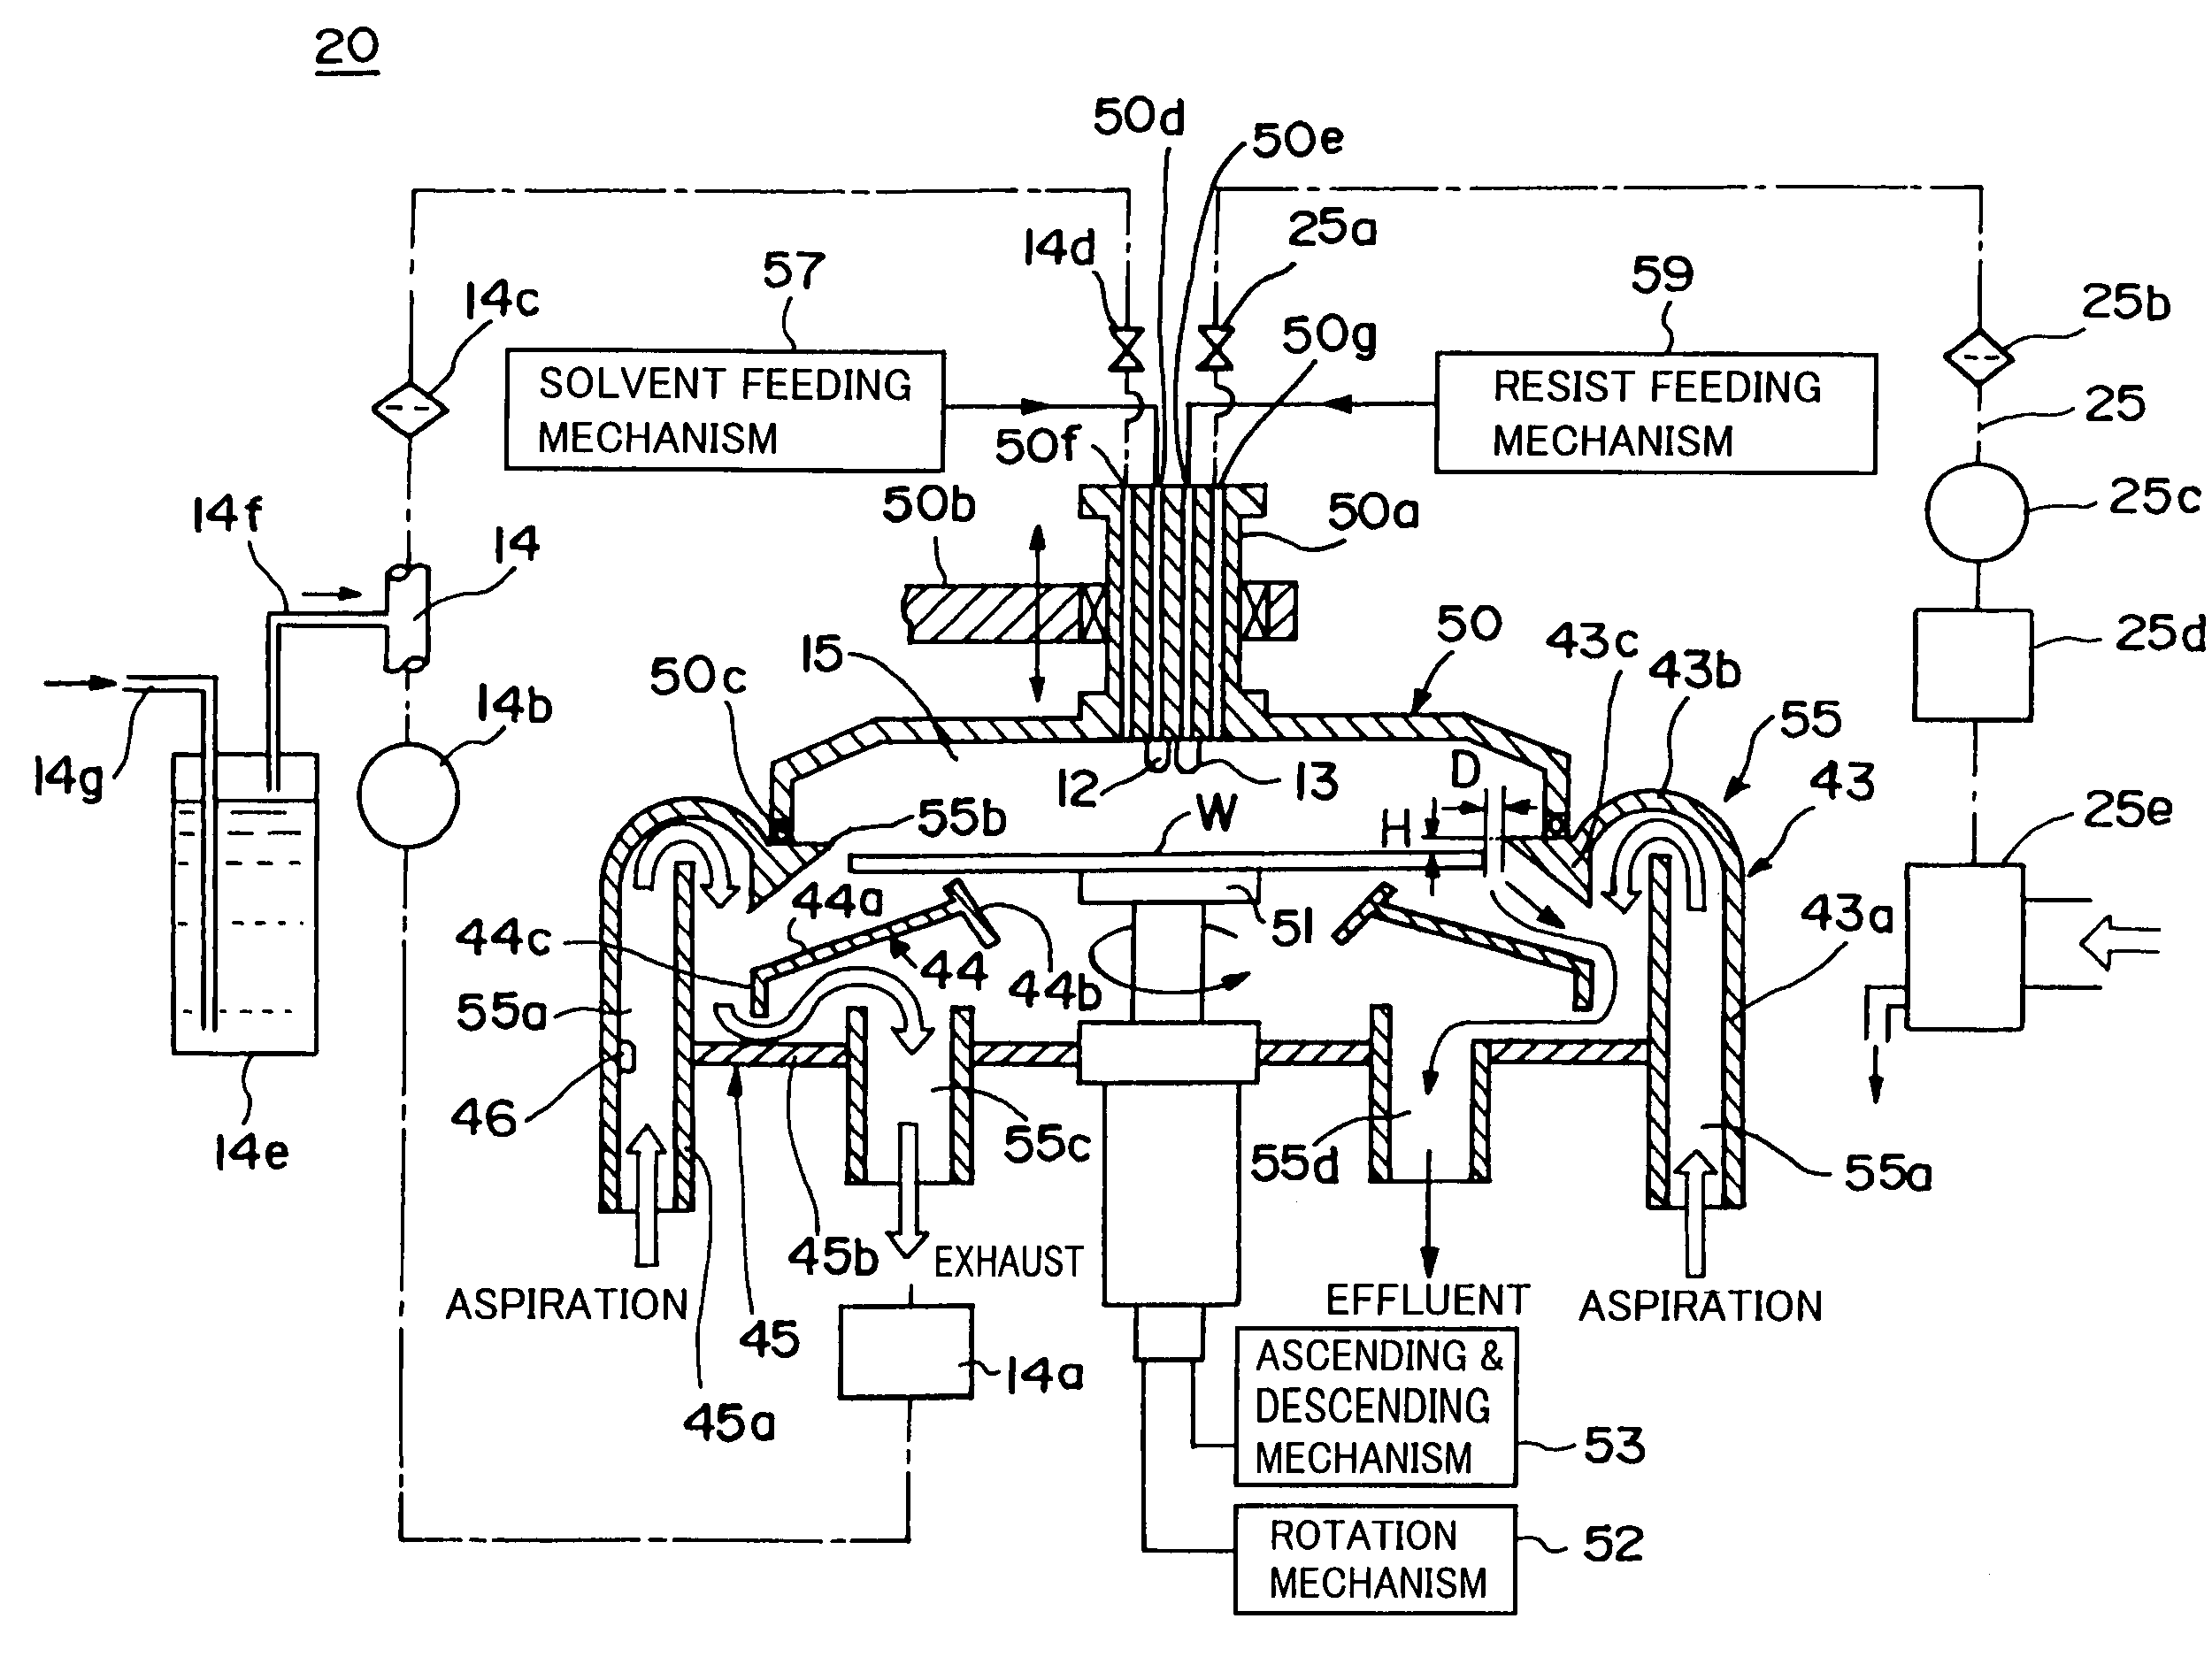 Apparatus and method of forming an applied film